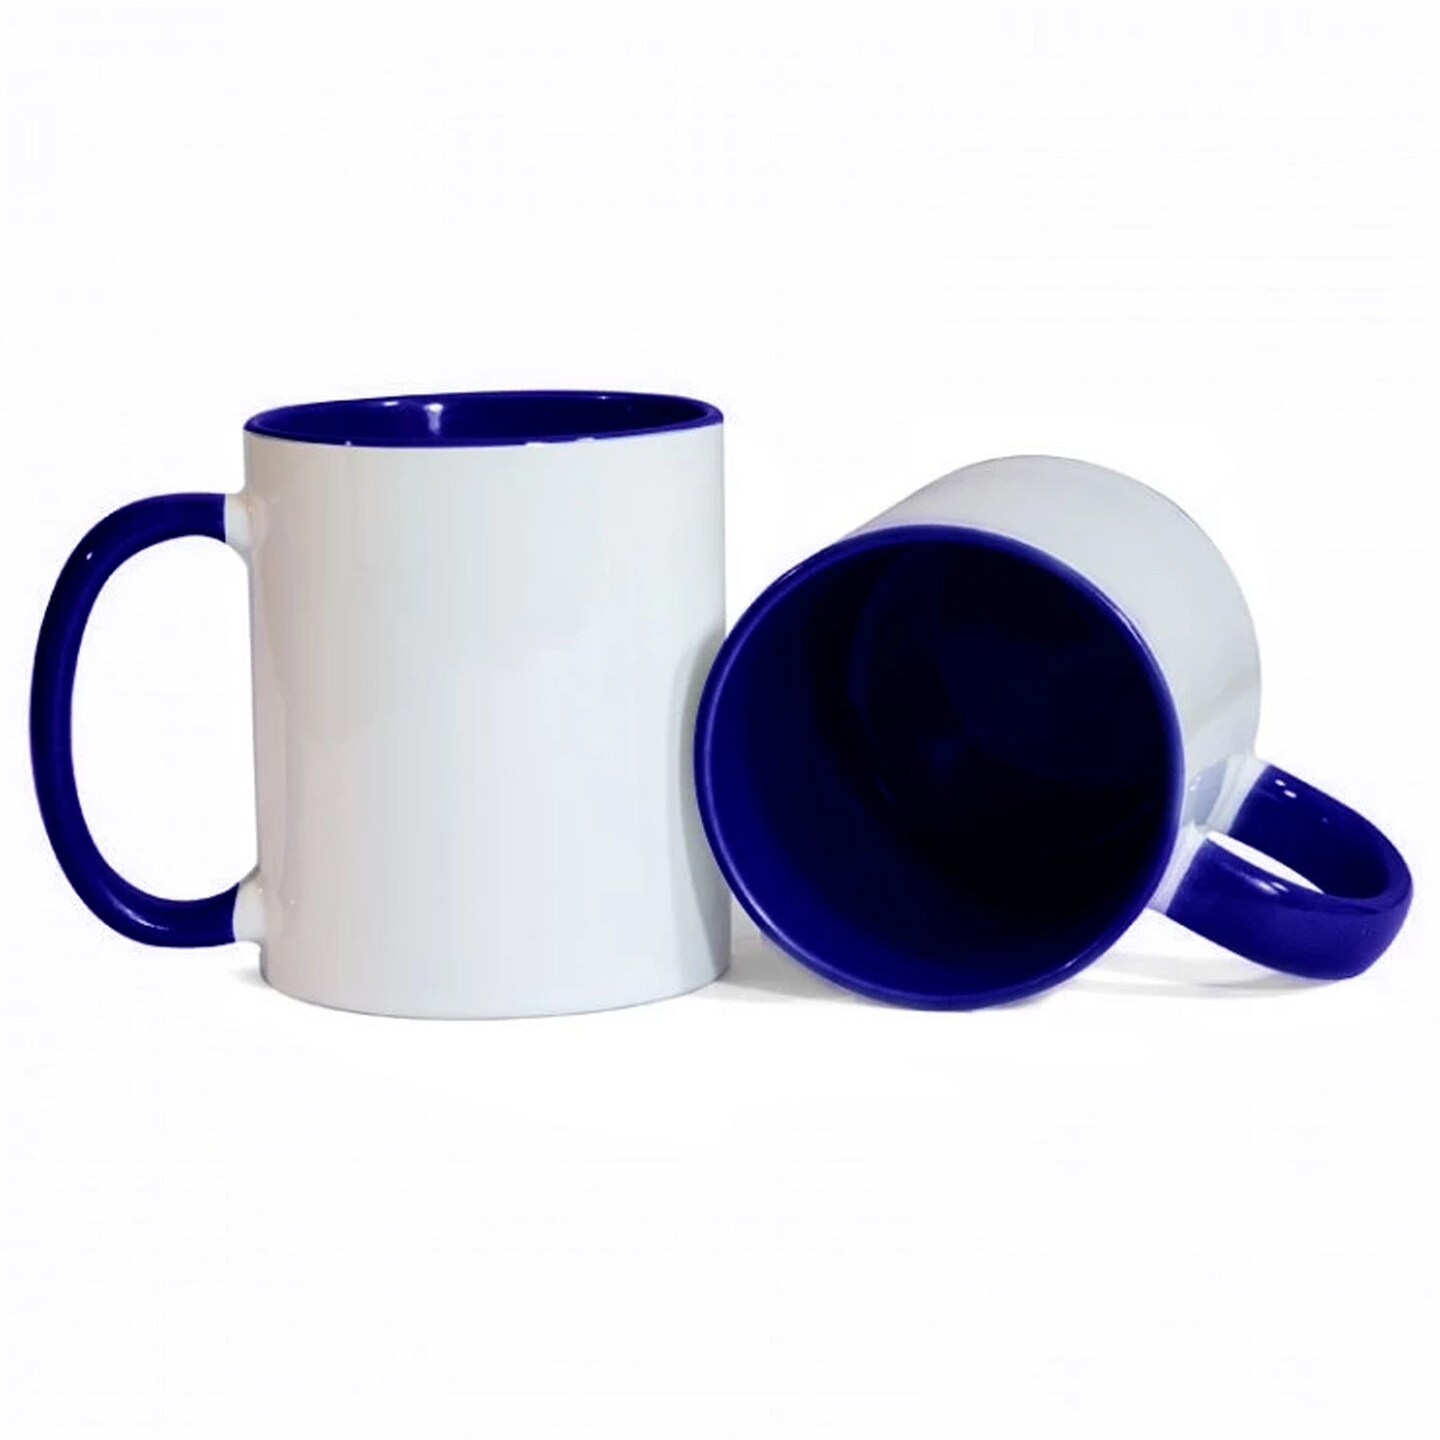  11oz Sublimation Mugs With Gift Mug Box. Mugs - Cardboard Box  with Foam Supports Case of 12 : Home & Kitchen